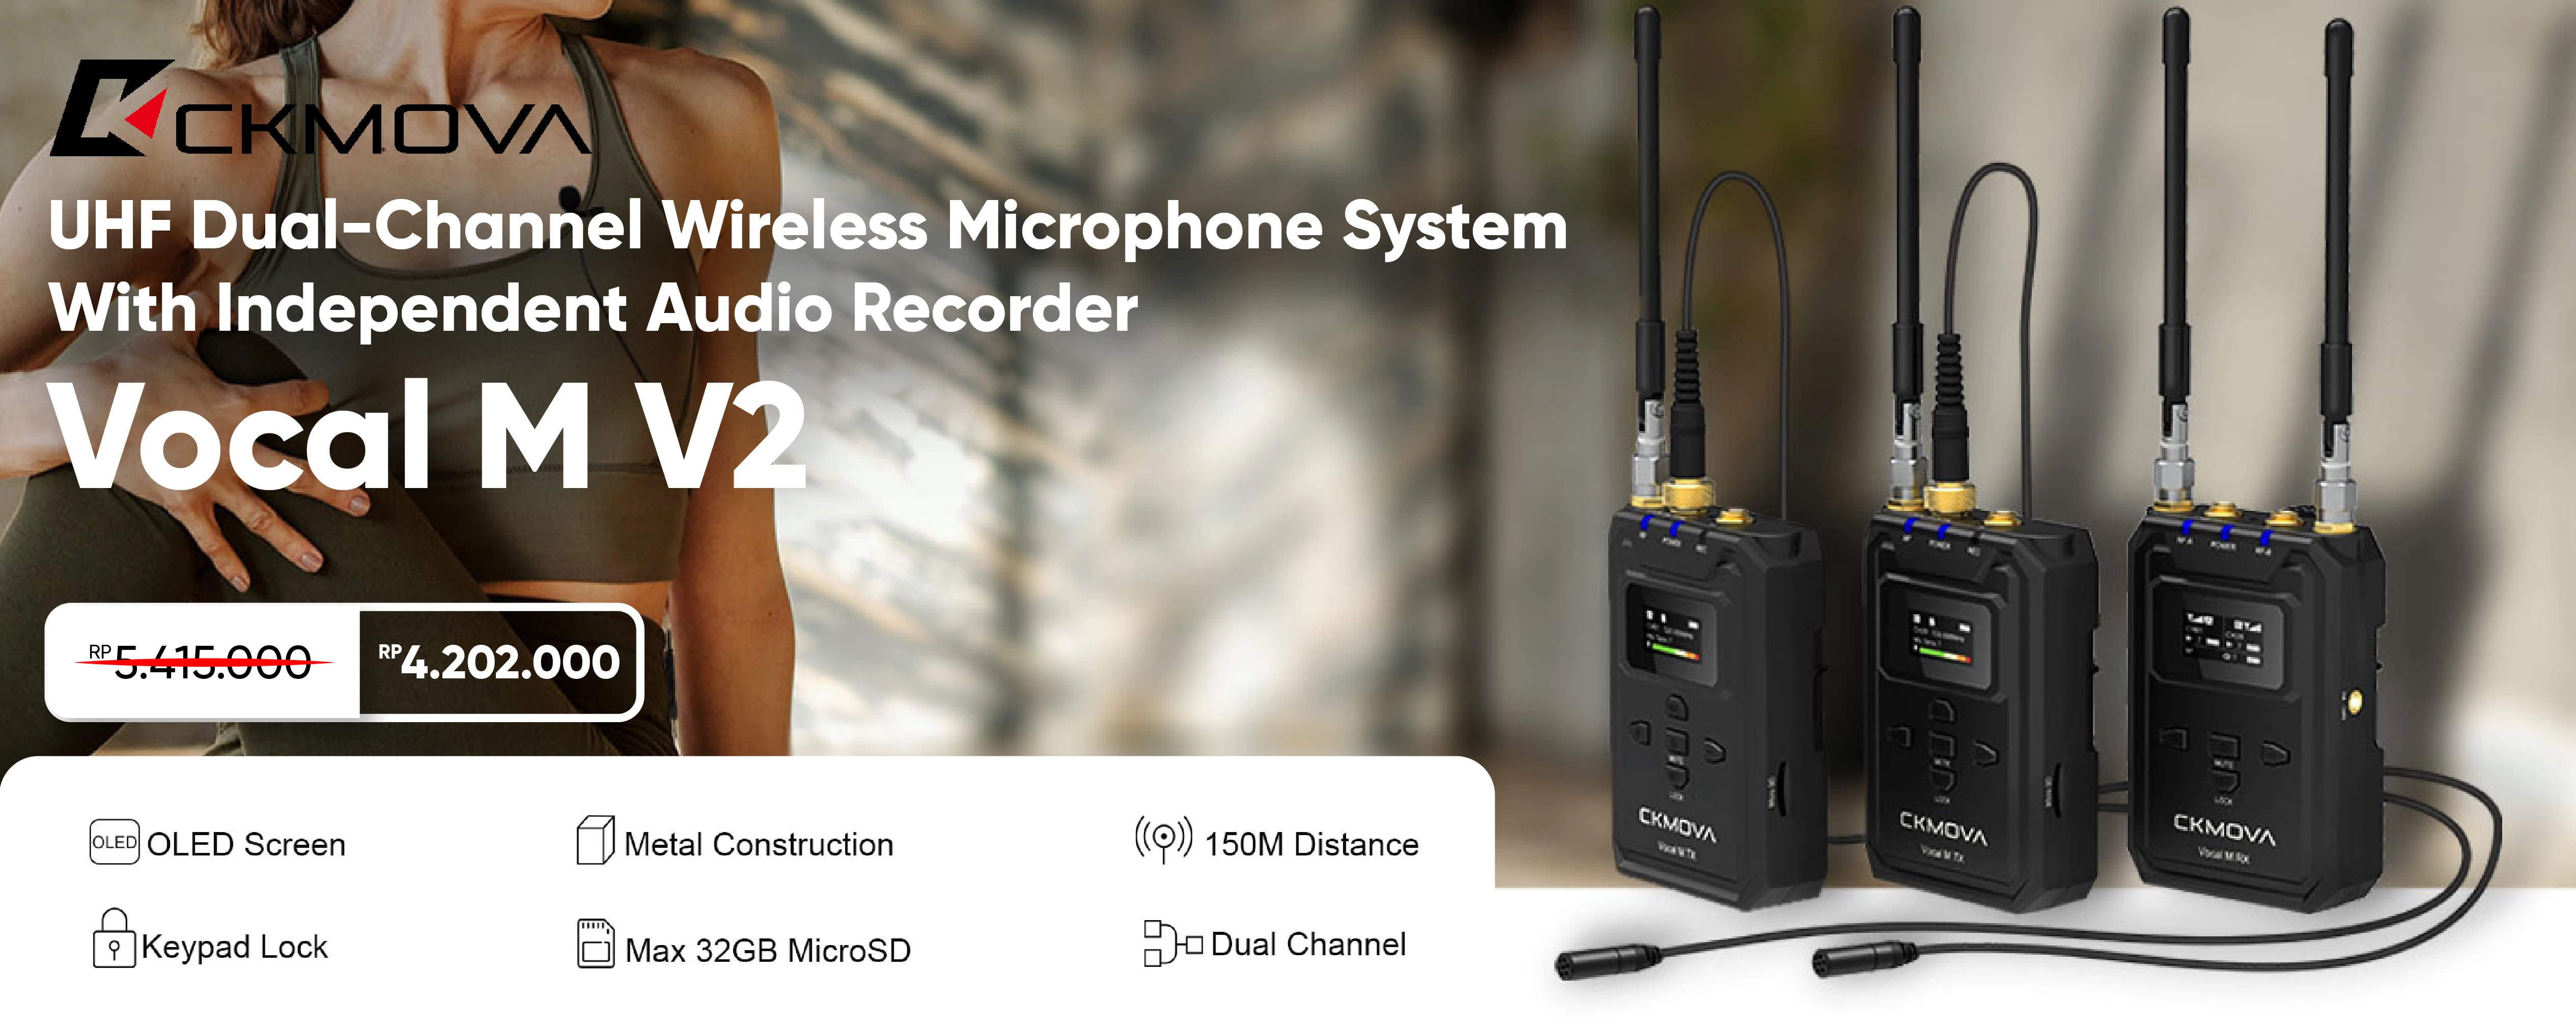 CKMova Vocal M V2 UHF Dual-Channel Wireless Microphone System With Independent Audio Recorder